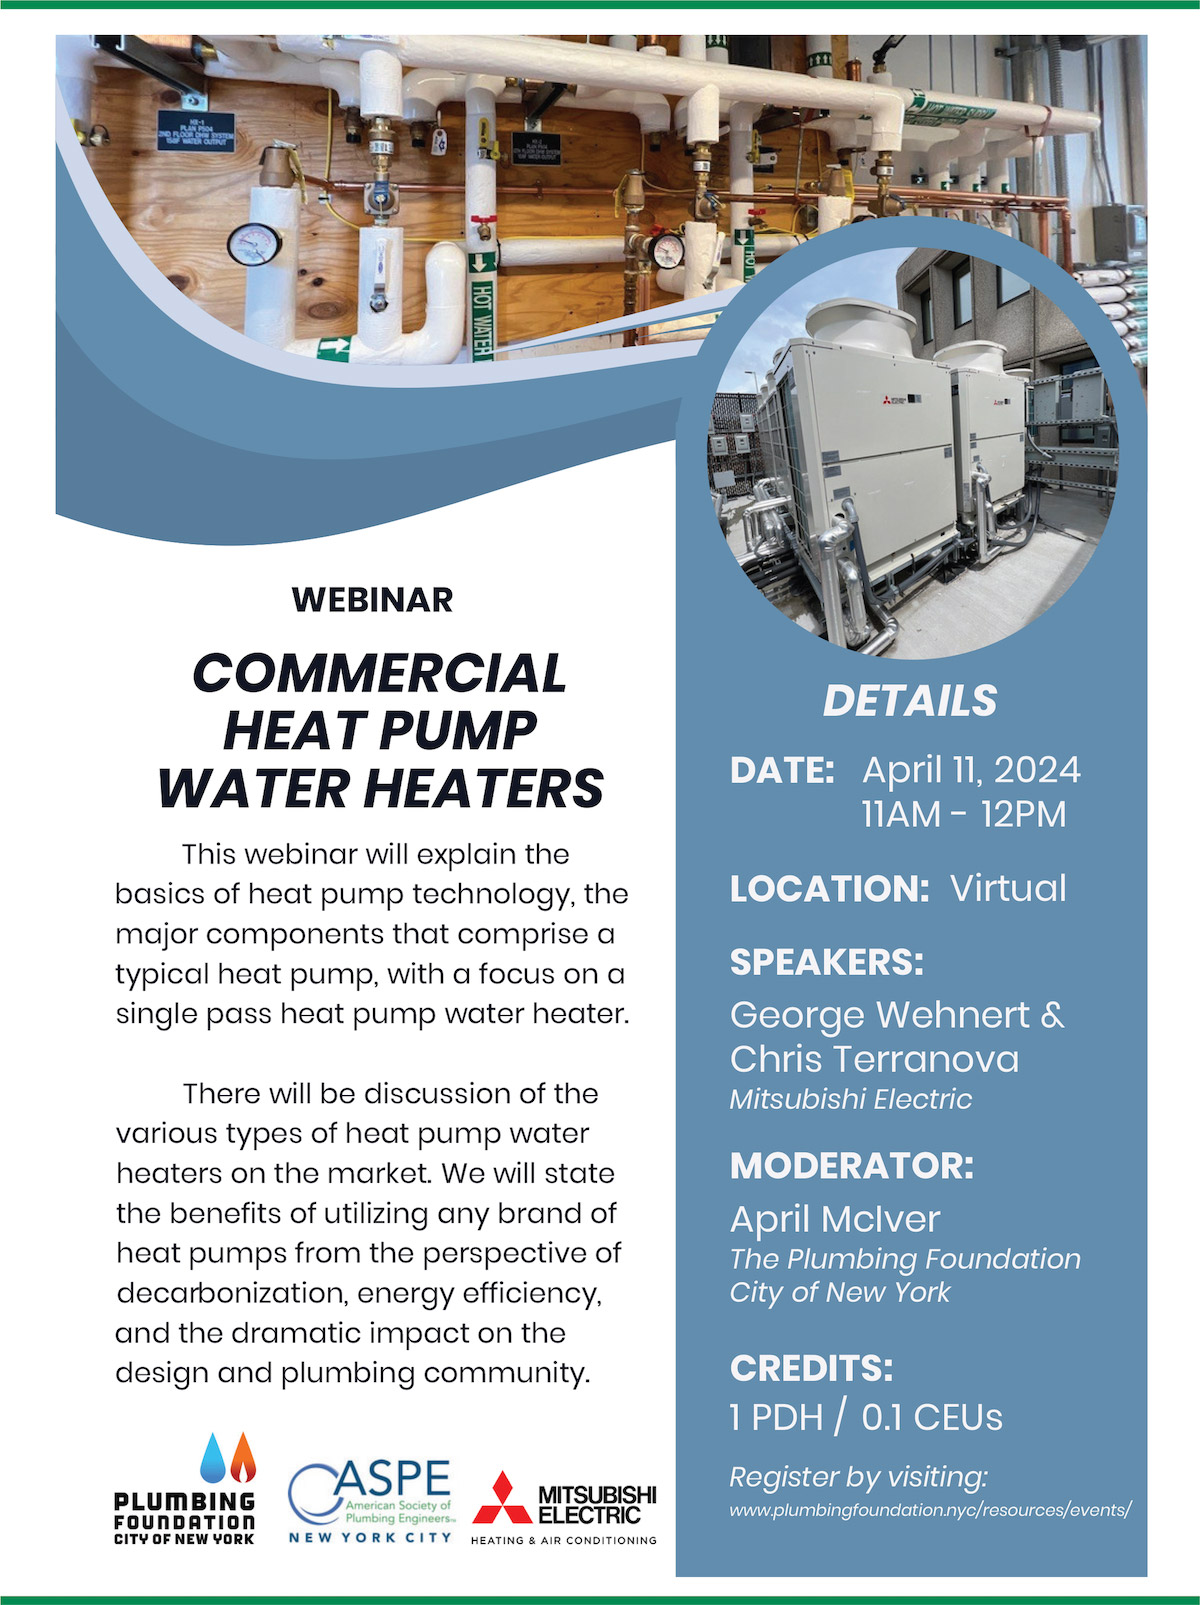 Webinar Commercial Heat Pump Water Heaters. This webinar will explain the basics of heat pump technology, the major components that comprise atypical heat pump, with a focus on a single pass heat pump water heater. There will be discussion of the various types of heat pump water heaters on the market. We will state the benefits of utilizing any brand of heat pumps from the perspective of decarbonization, energy efficiency, and the dramatic impact on the design and plumbing community.